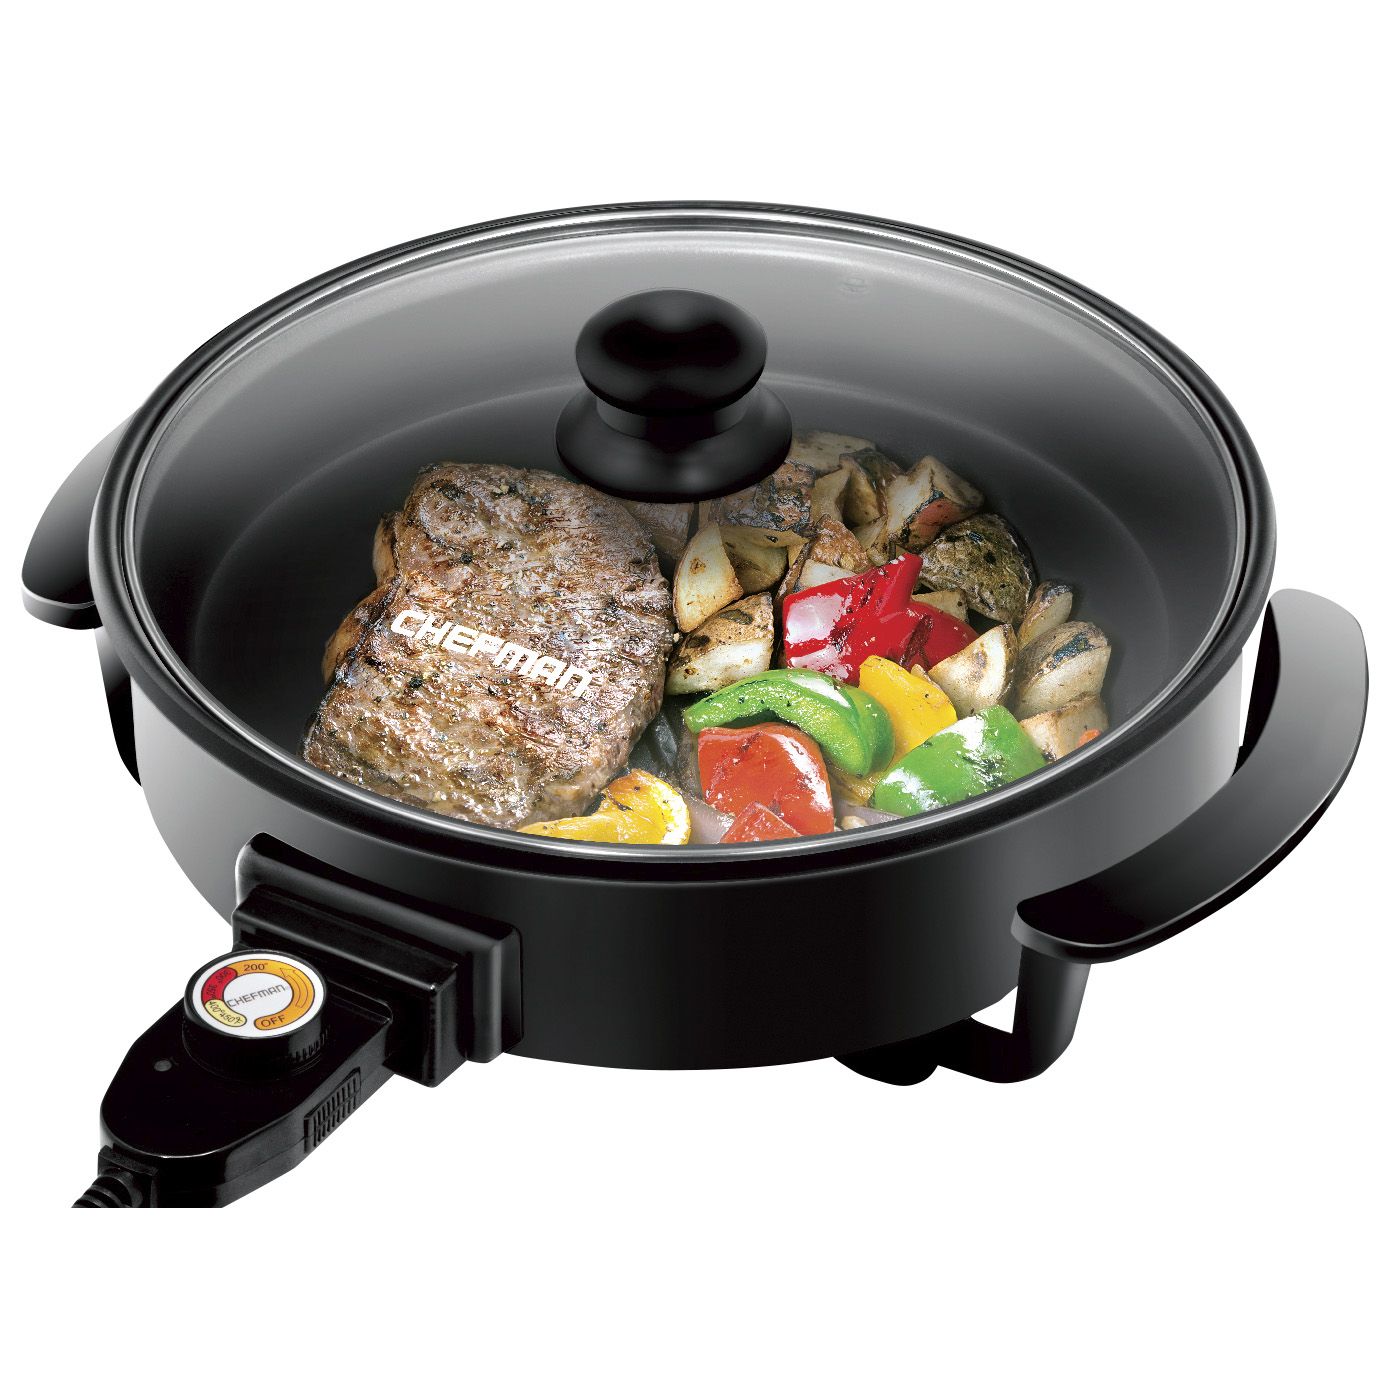 Fingerhut - Oster Electric Skillet with Removable Pan